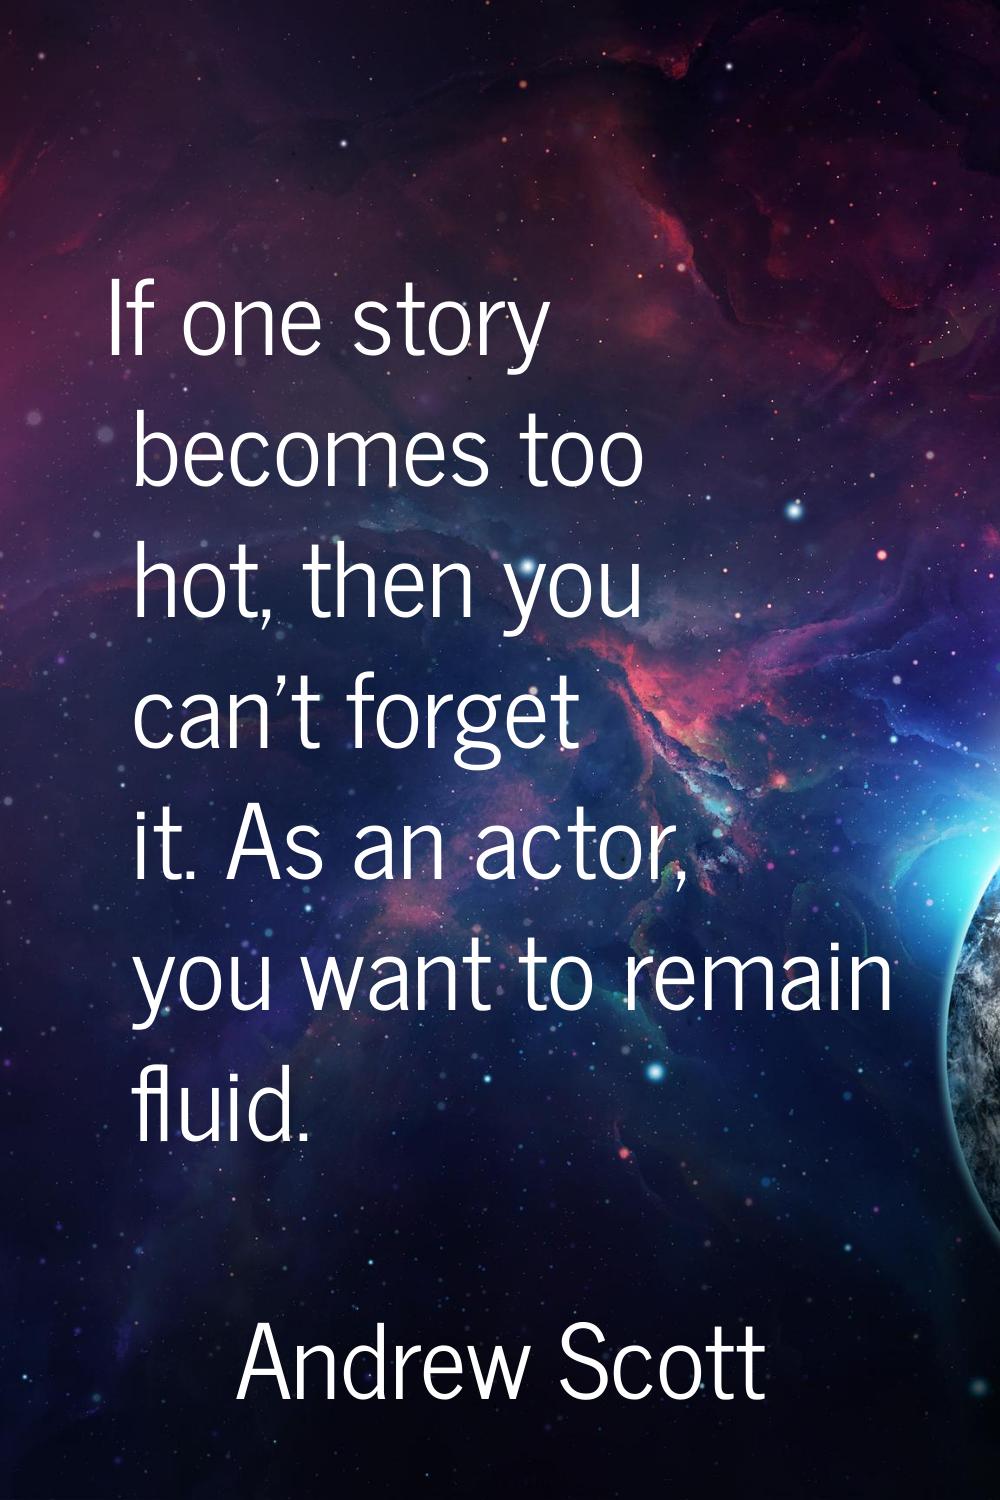 If one story becomes too hot, then you can't forget it. As an actor, you want to remain fluid.